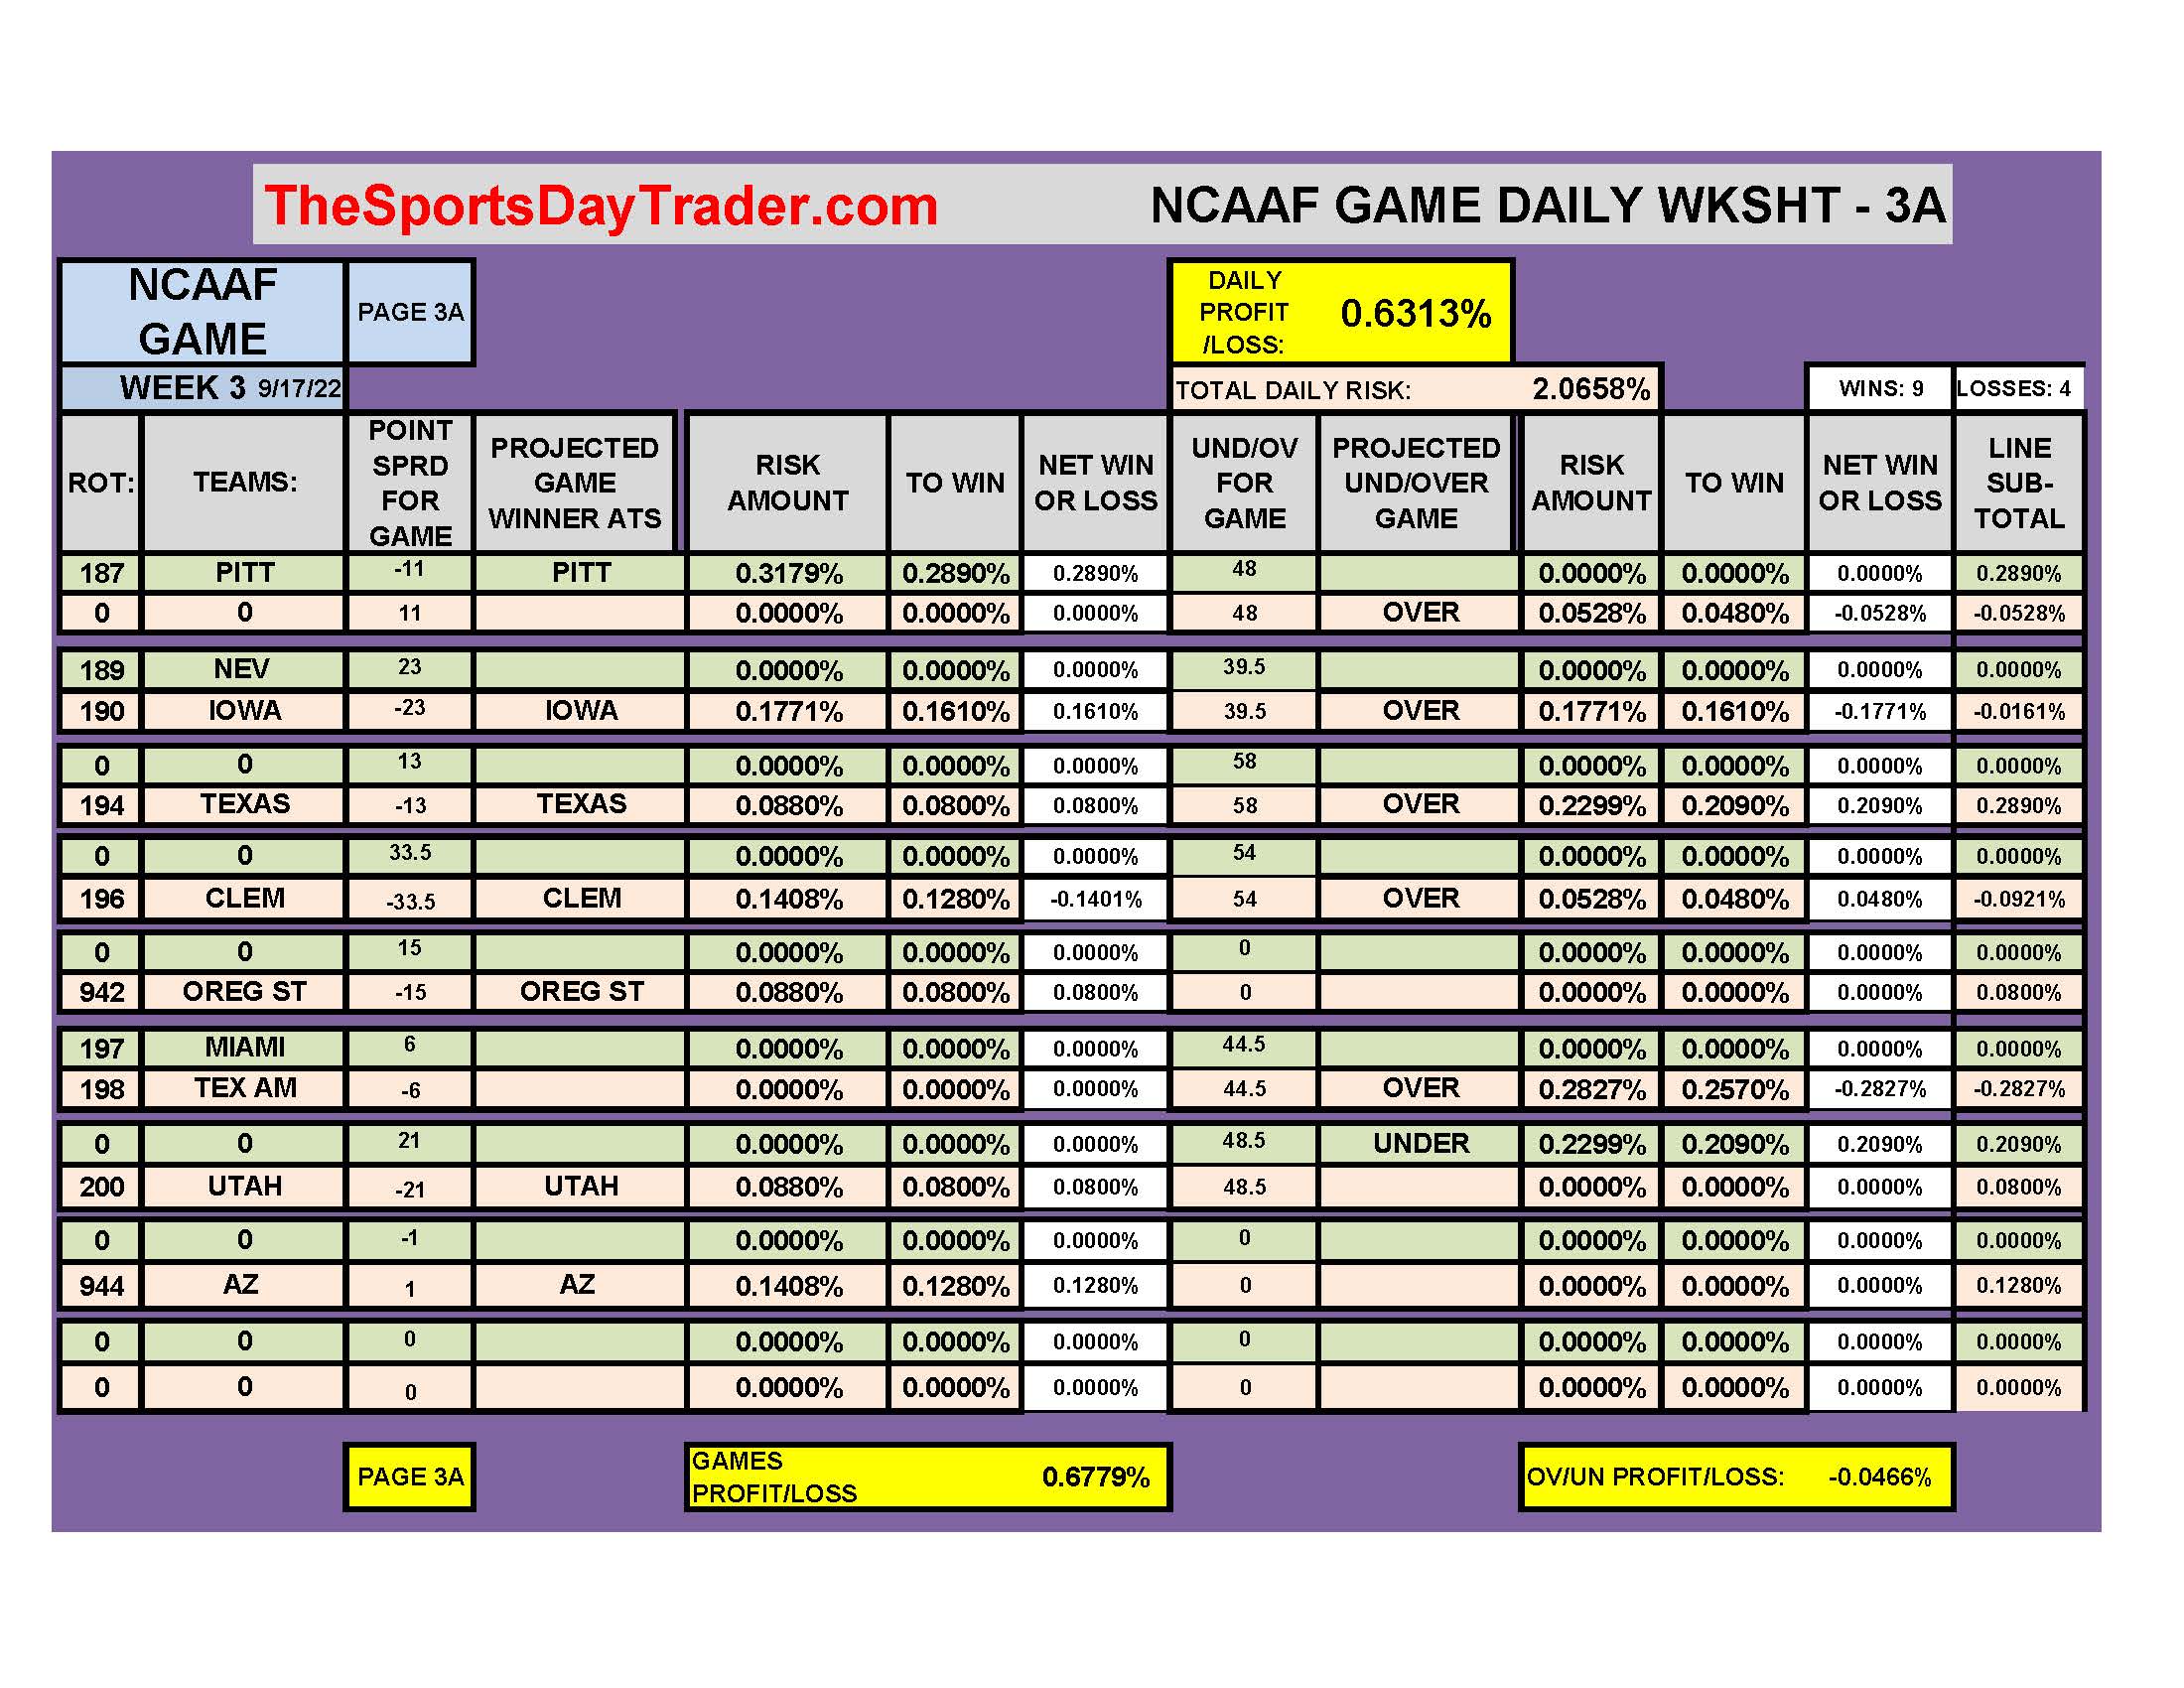 NCAAF 9/17/22 GAME DAILY RESULTS page 3